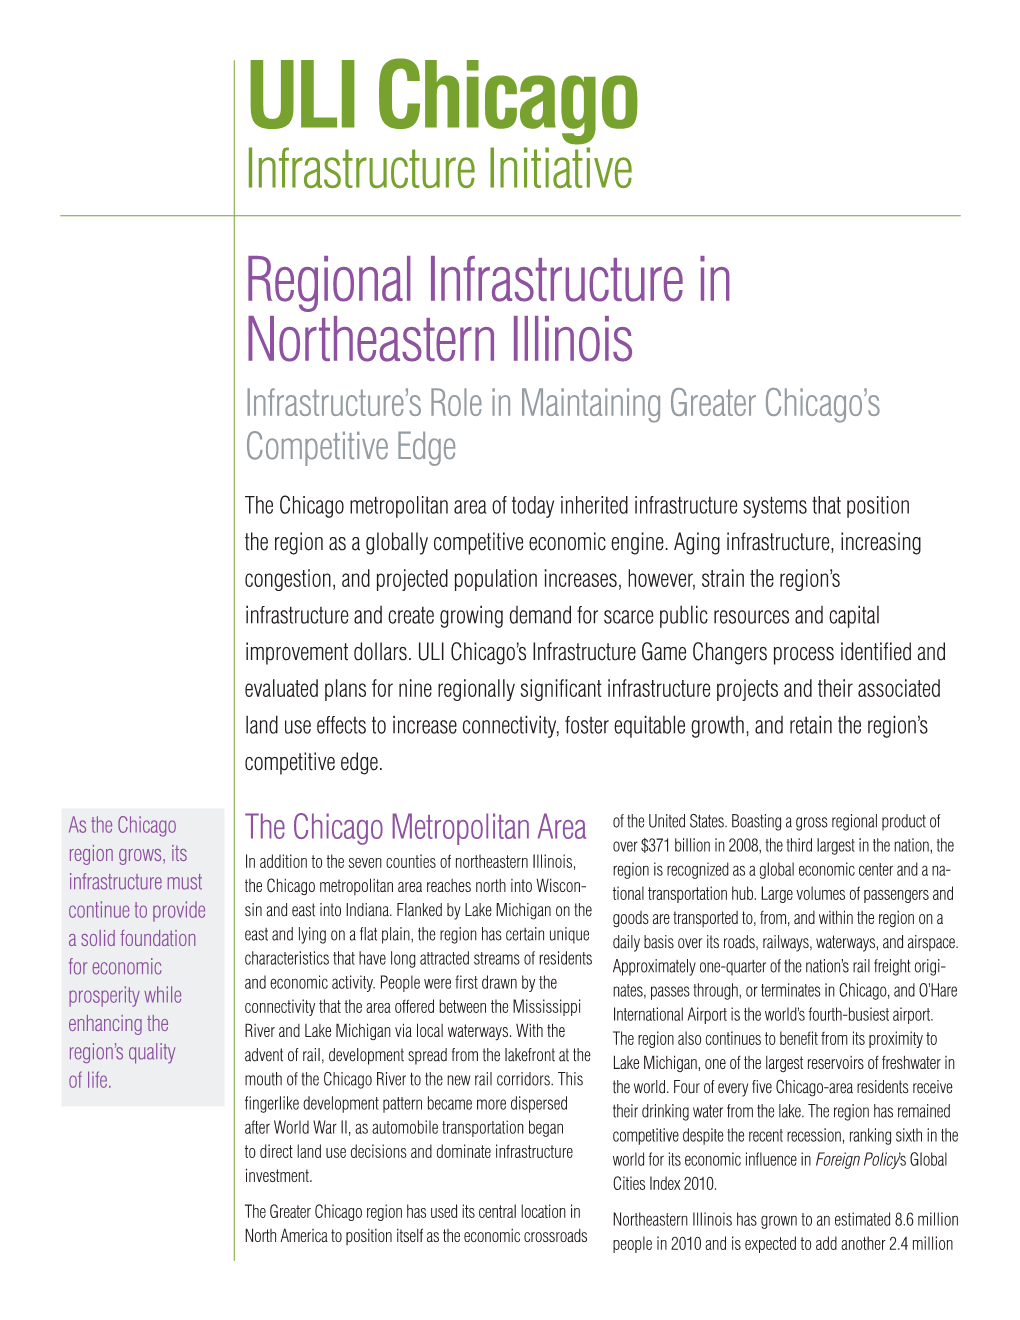 ULI Chicago Infrastructure Initiative Regional Infrastructure in Northeastern Illinois Infrastructure’S Role in Maintaining Greater Chicago’S Competitive Edge